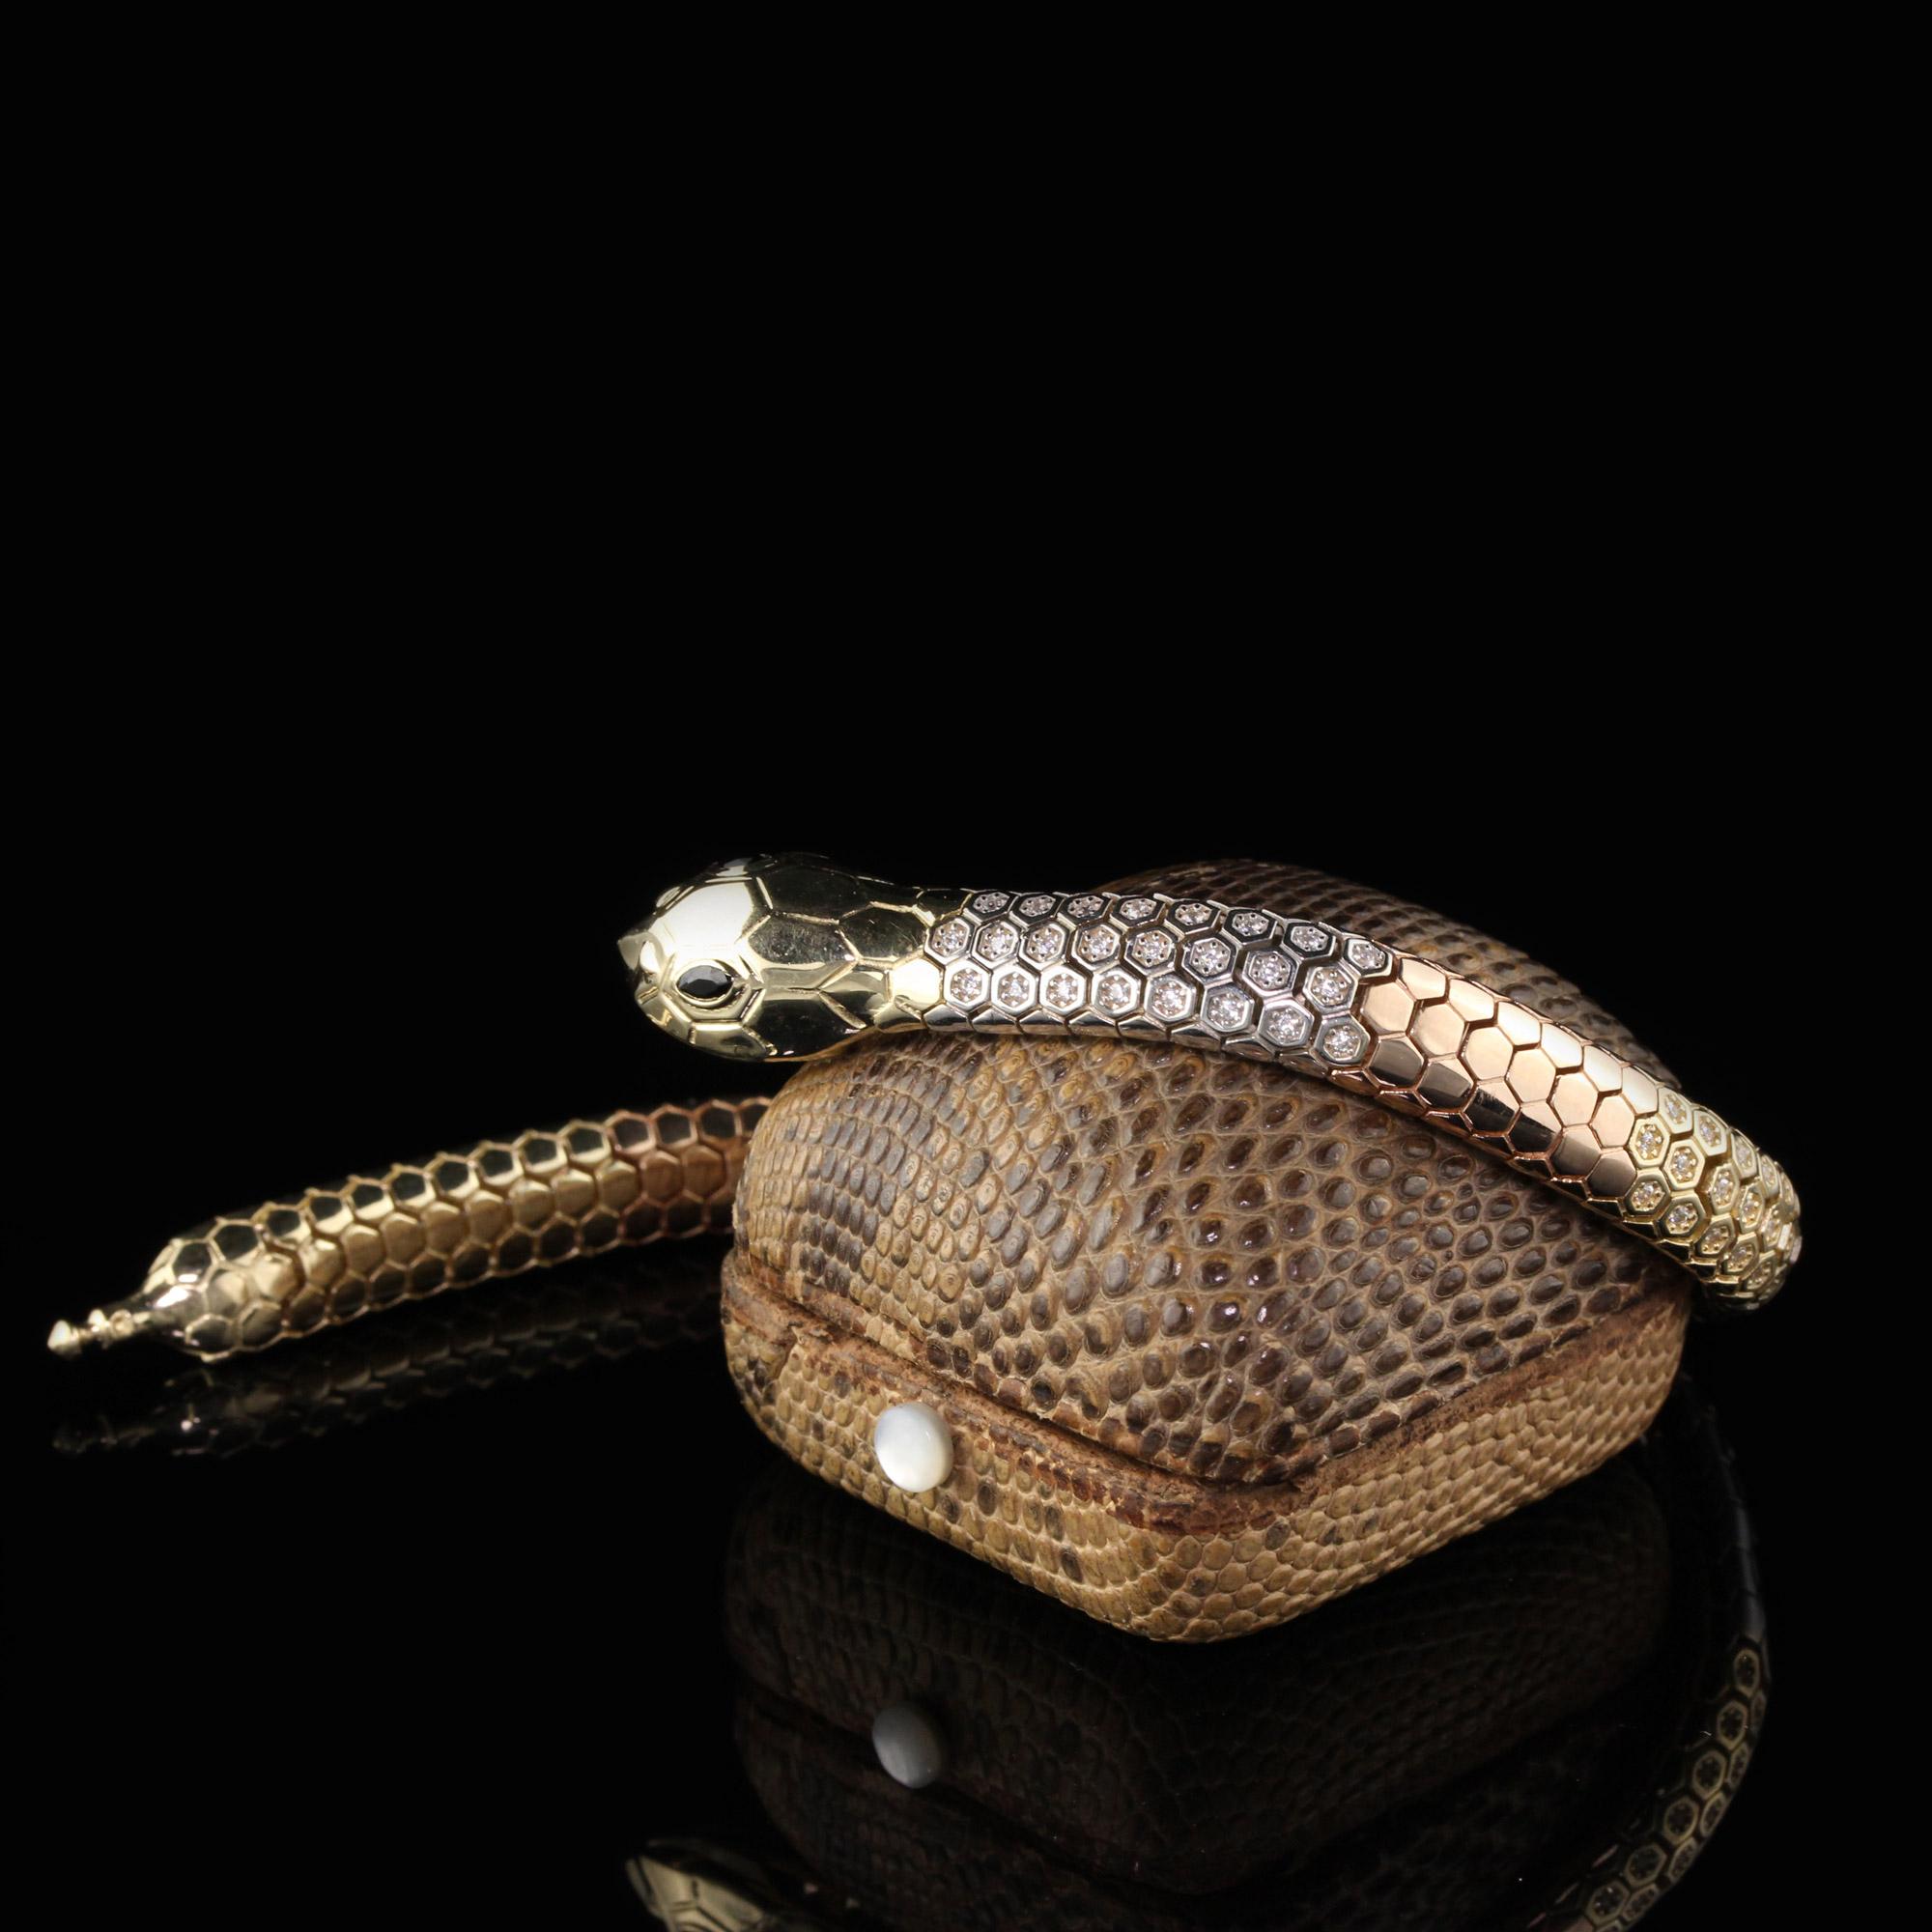 Gorgeous Vintage 14K Tri Tone Gold Diamond Snake Bracelet . This gorgeous bracelet is very intricate and in excellent condition. It has diamonds all on its back and has three different gold tones in it being yellow, rose, and white gold. The snake